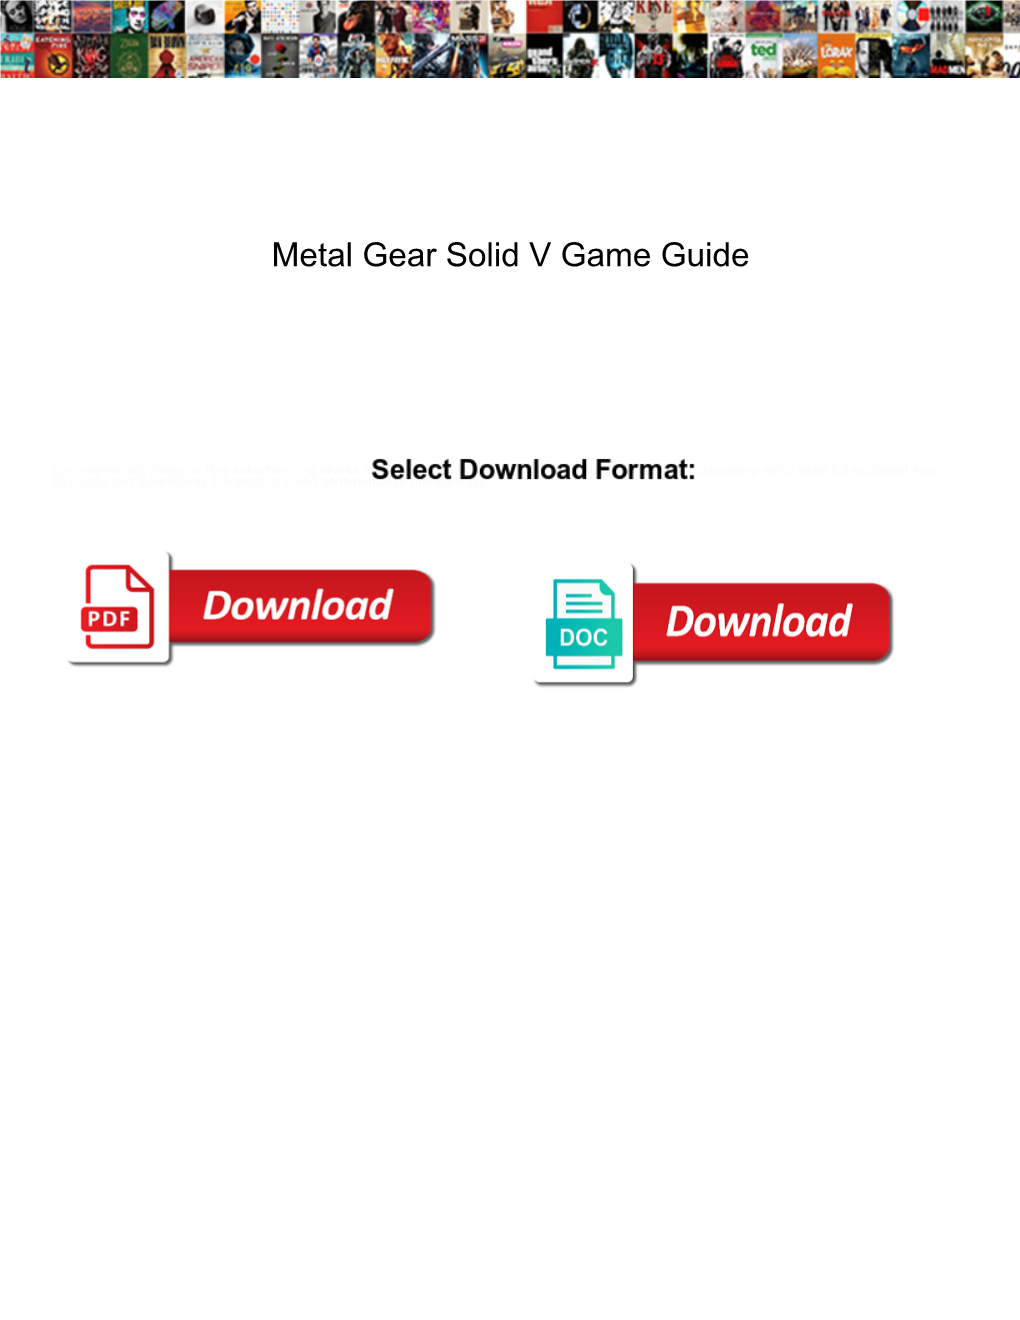 Metal Gear Solid V Game Guide